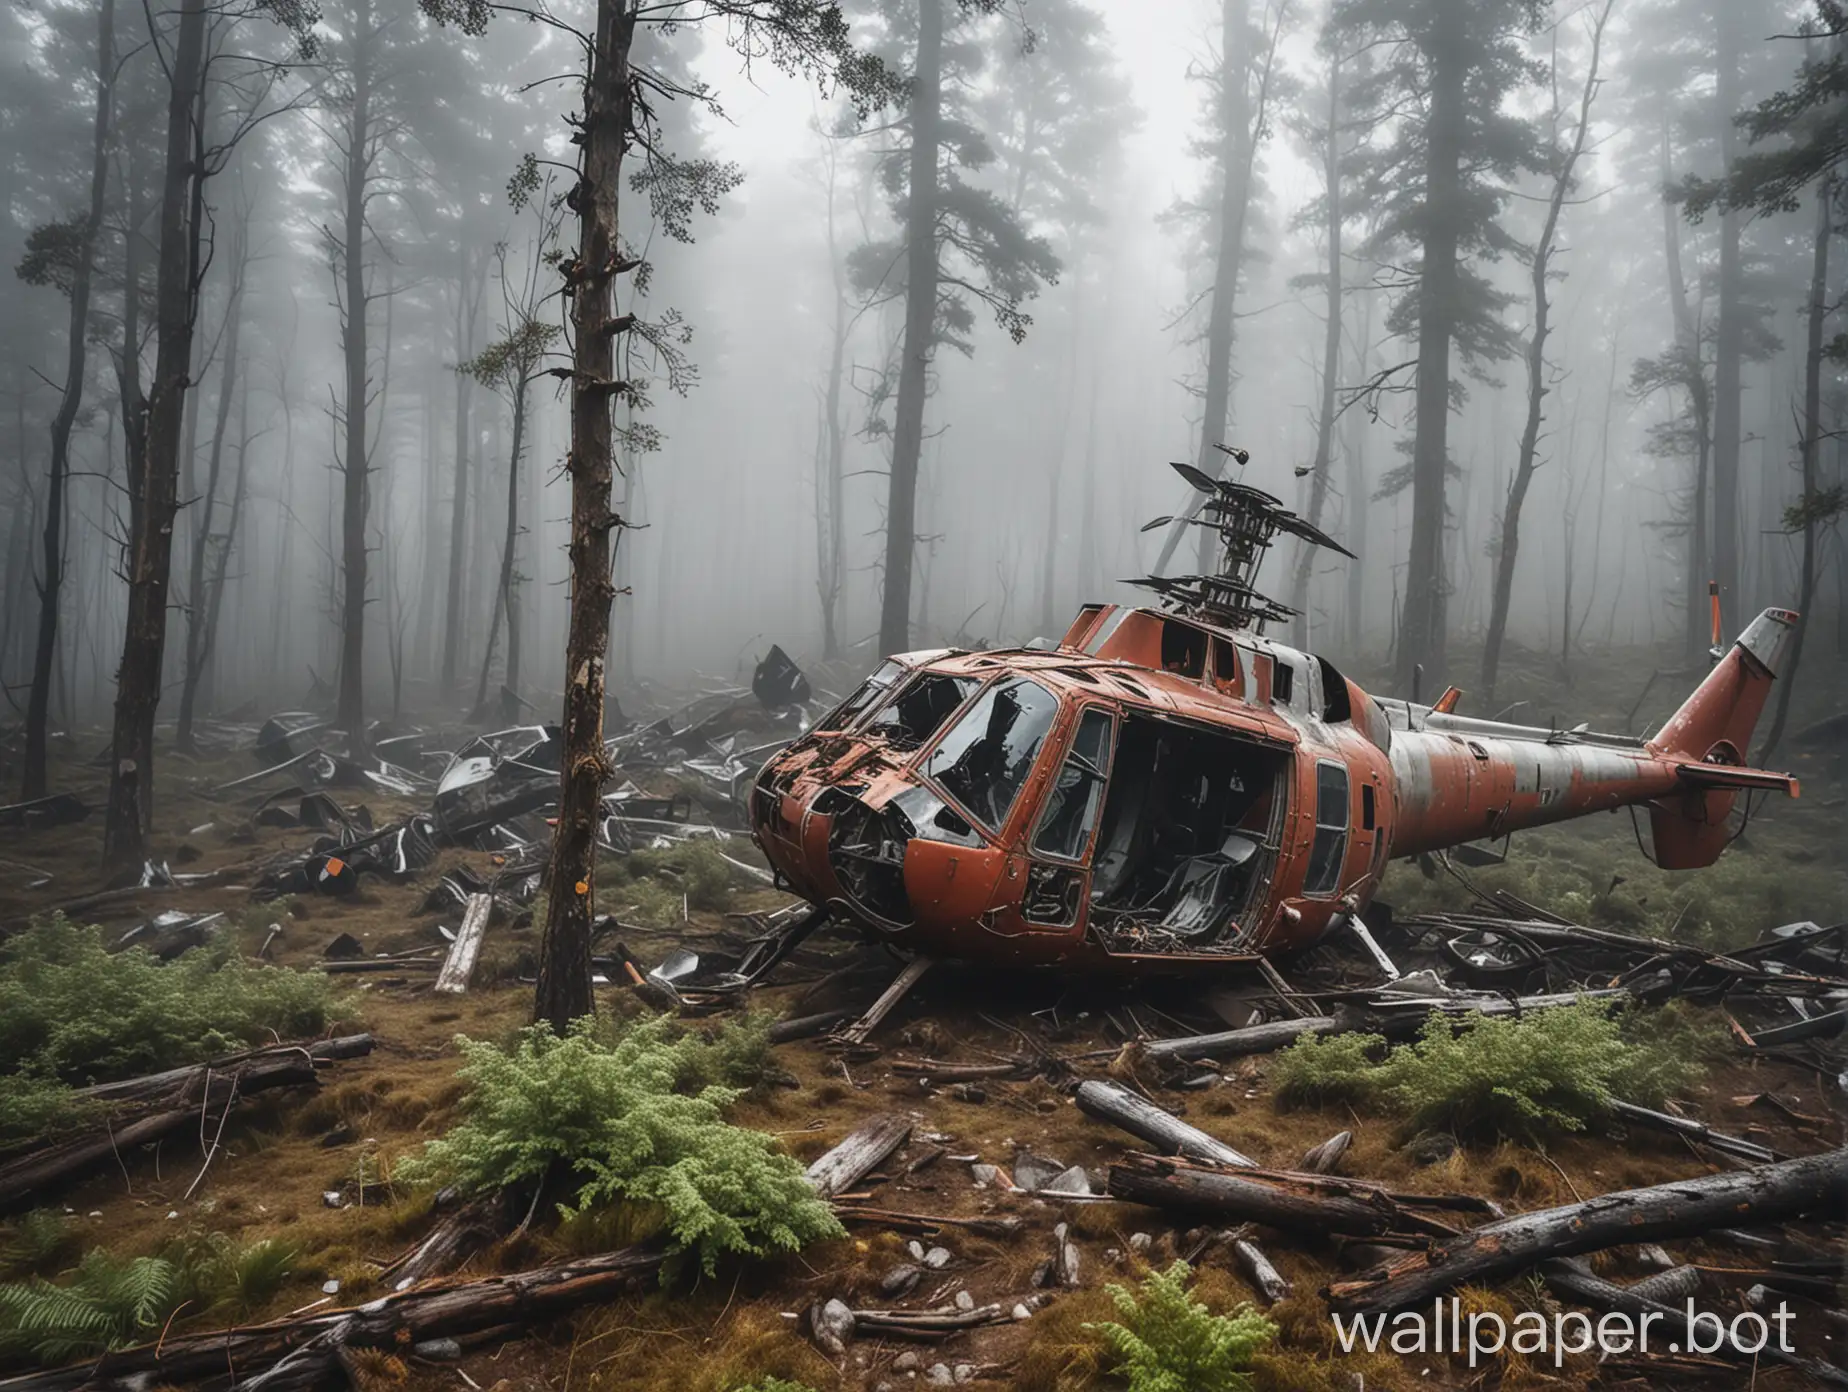 Helicopter debris. Wreck metal. Crashed in mountain. Trees, fog